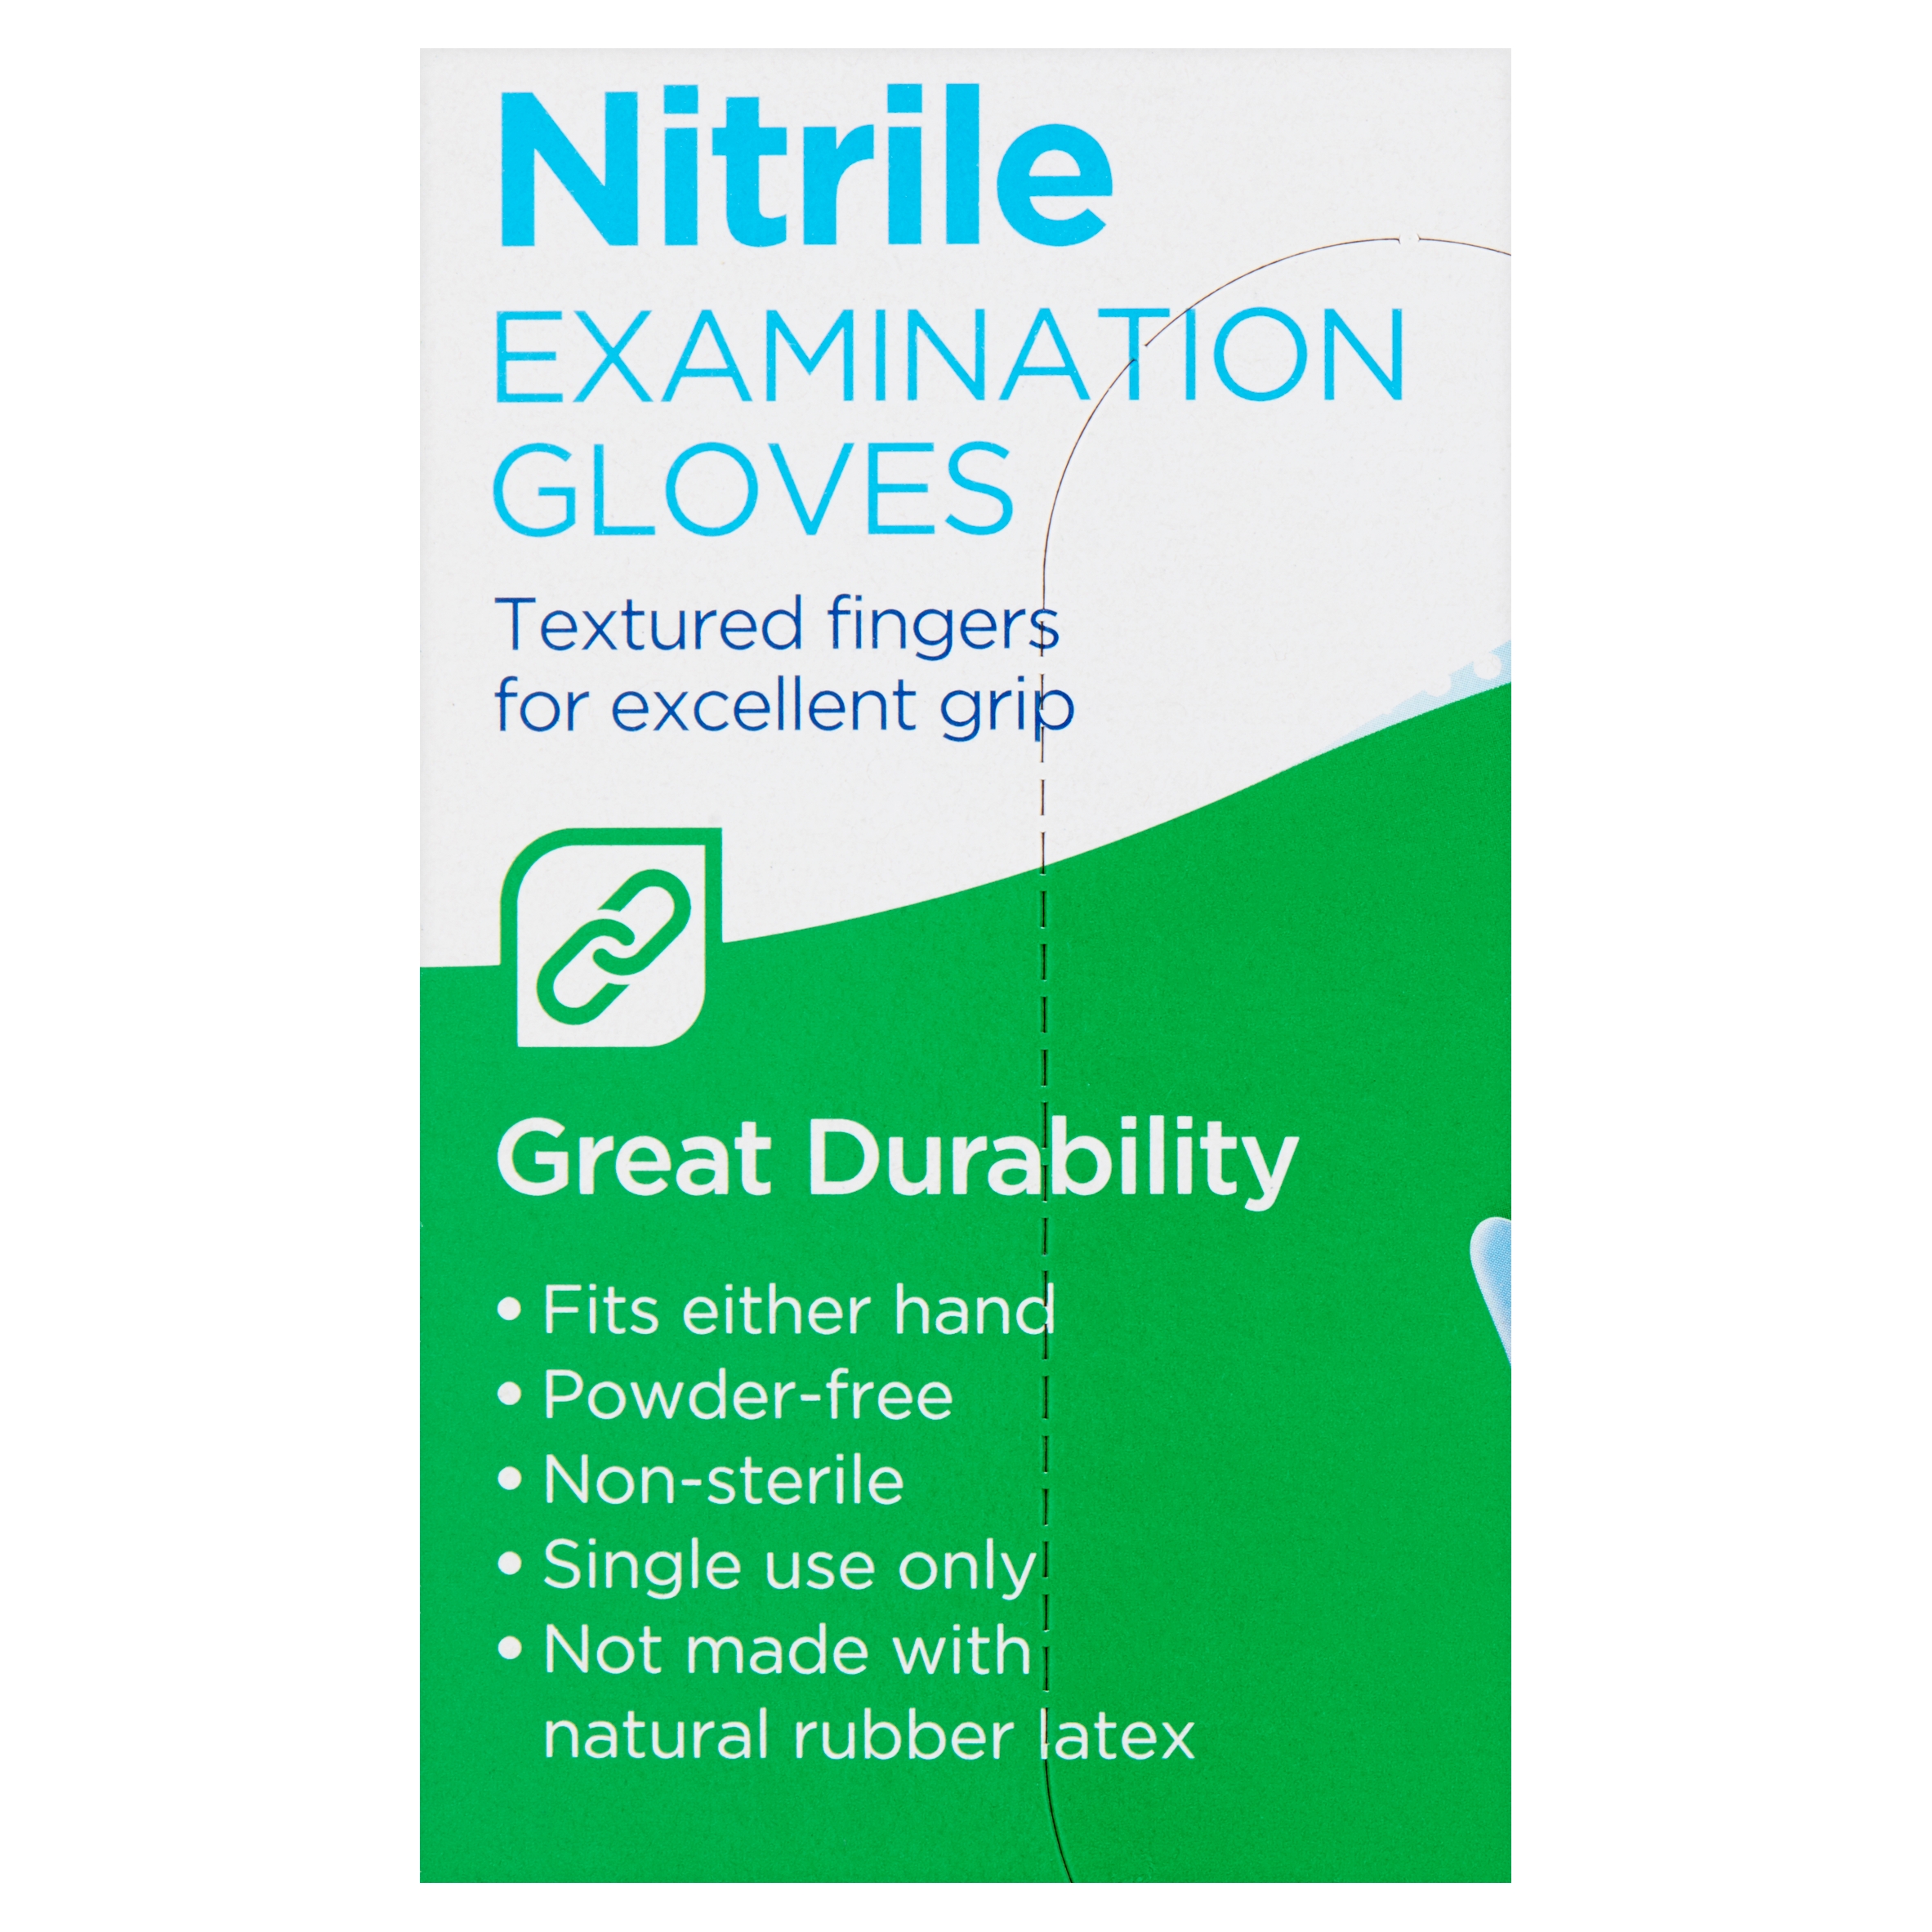 Equate Nitrile Examination Gloves, 100 count - image 5 of 10